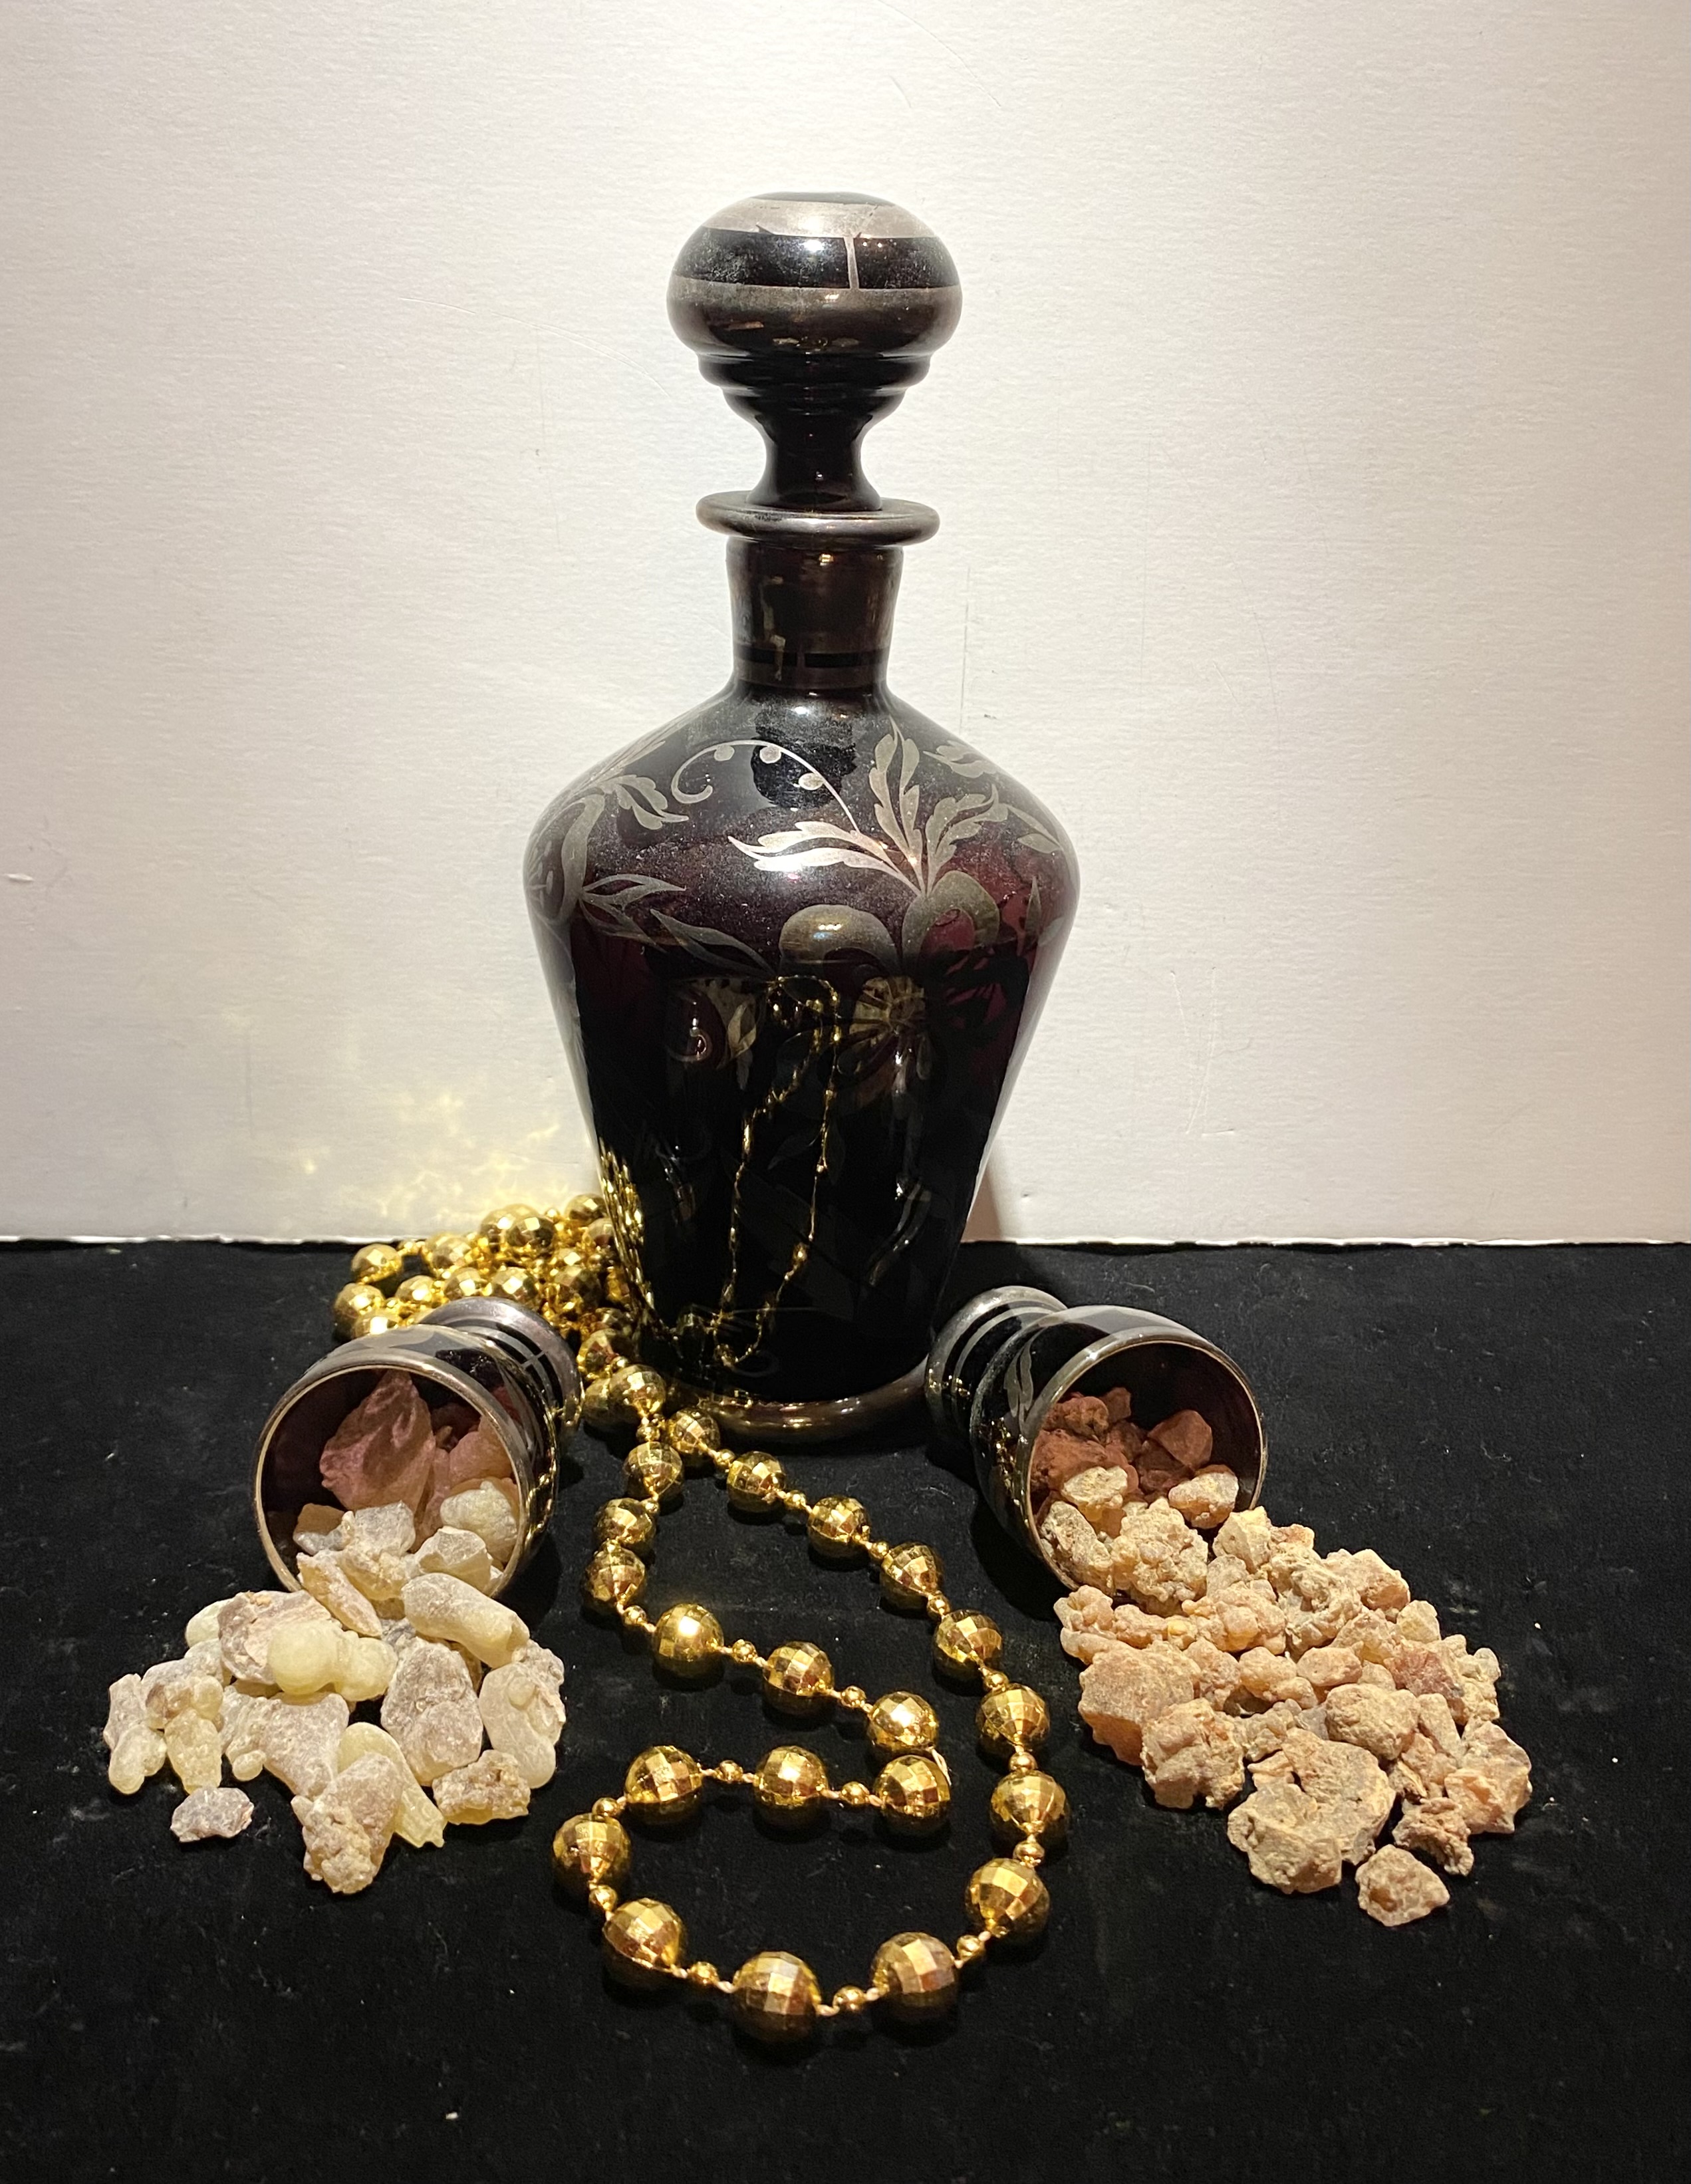 The demand for frankincense oil remains high, making it a $7 billion industry. Shown are resin of frankincense (left) and myrrh (right) trees.